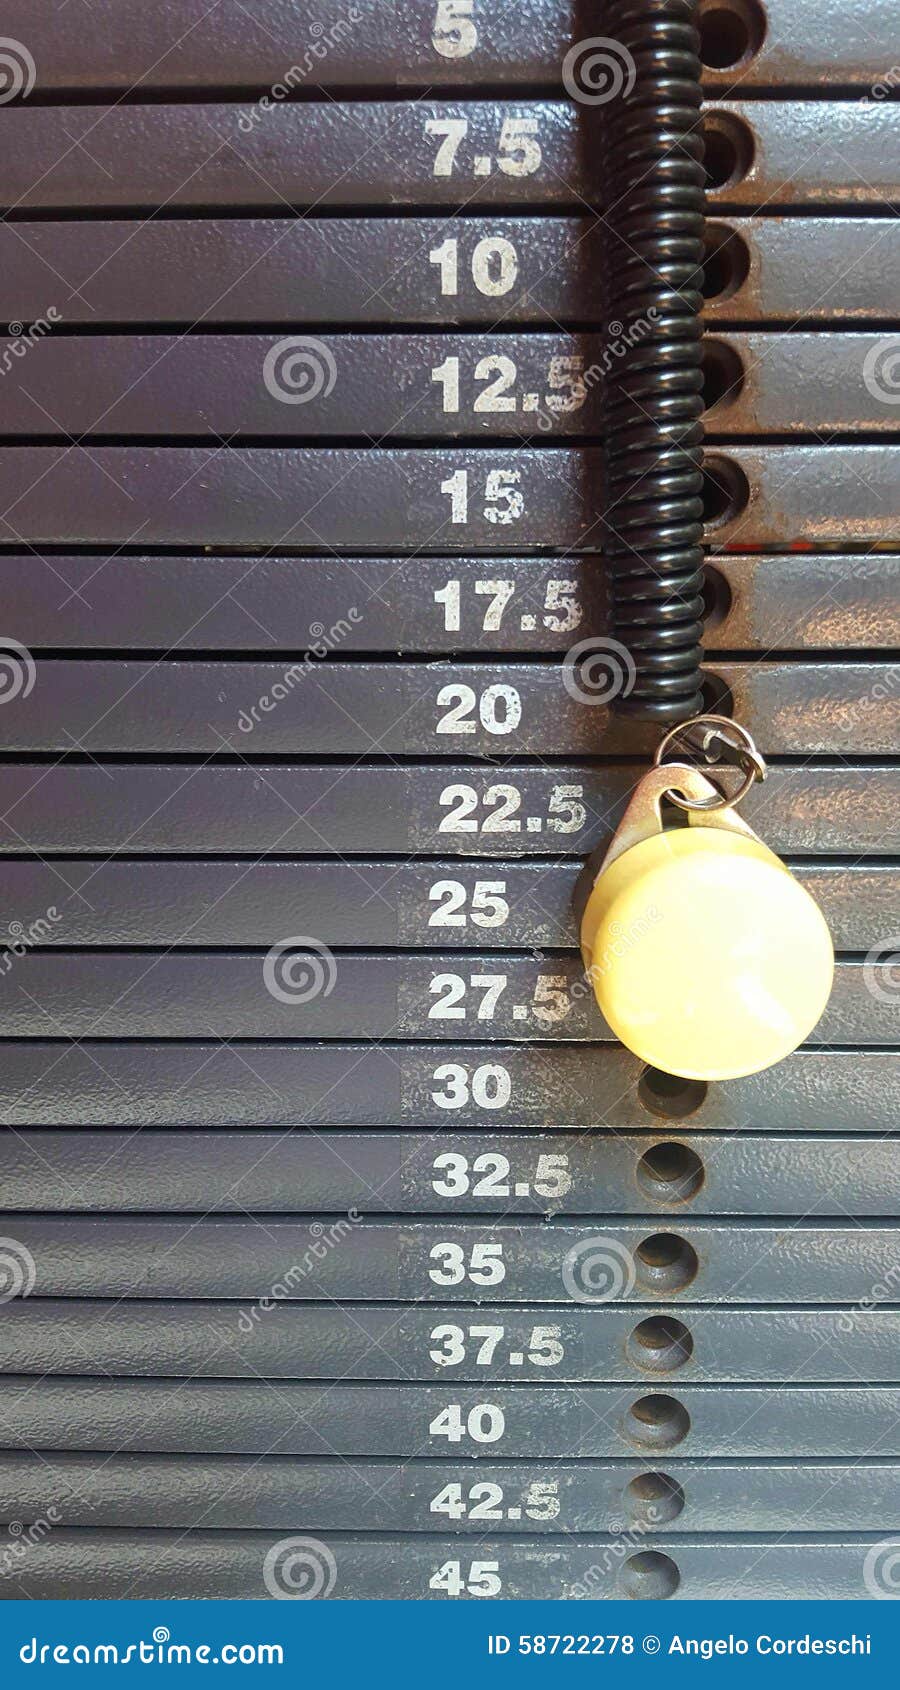 weight stack gray scale with graduation in kilograms with yellow pin